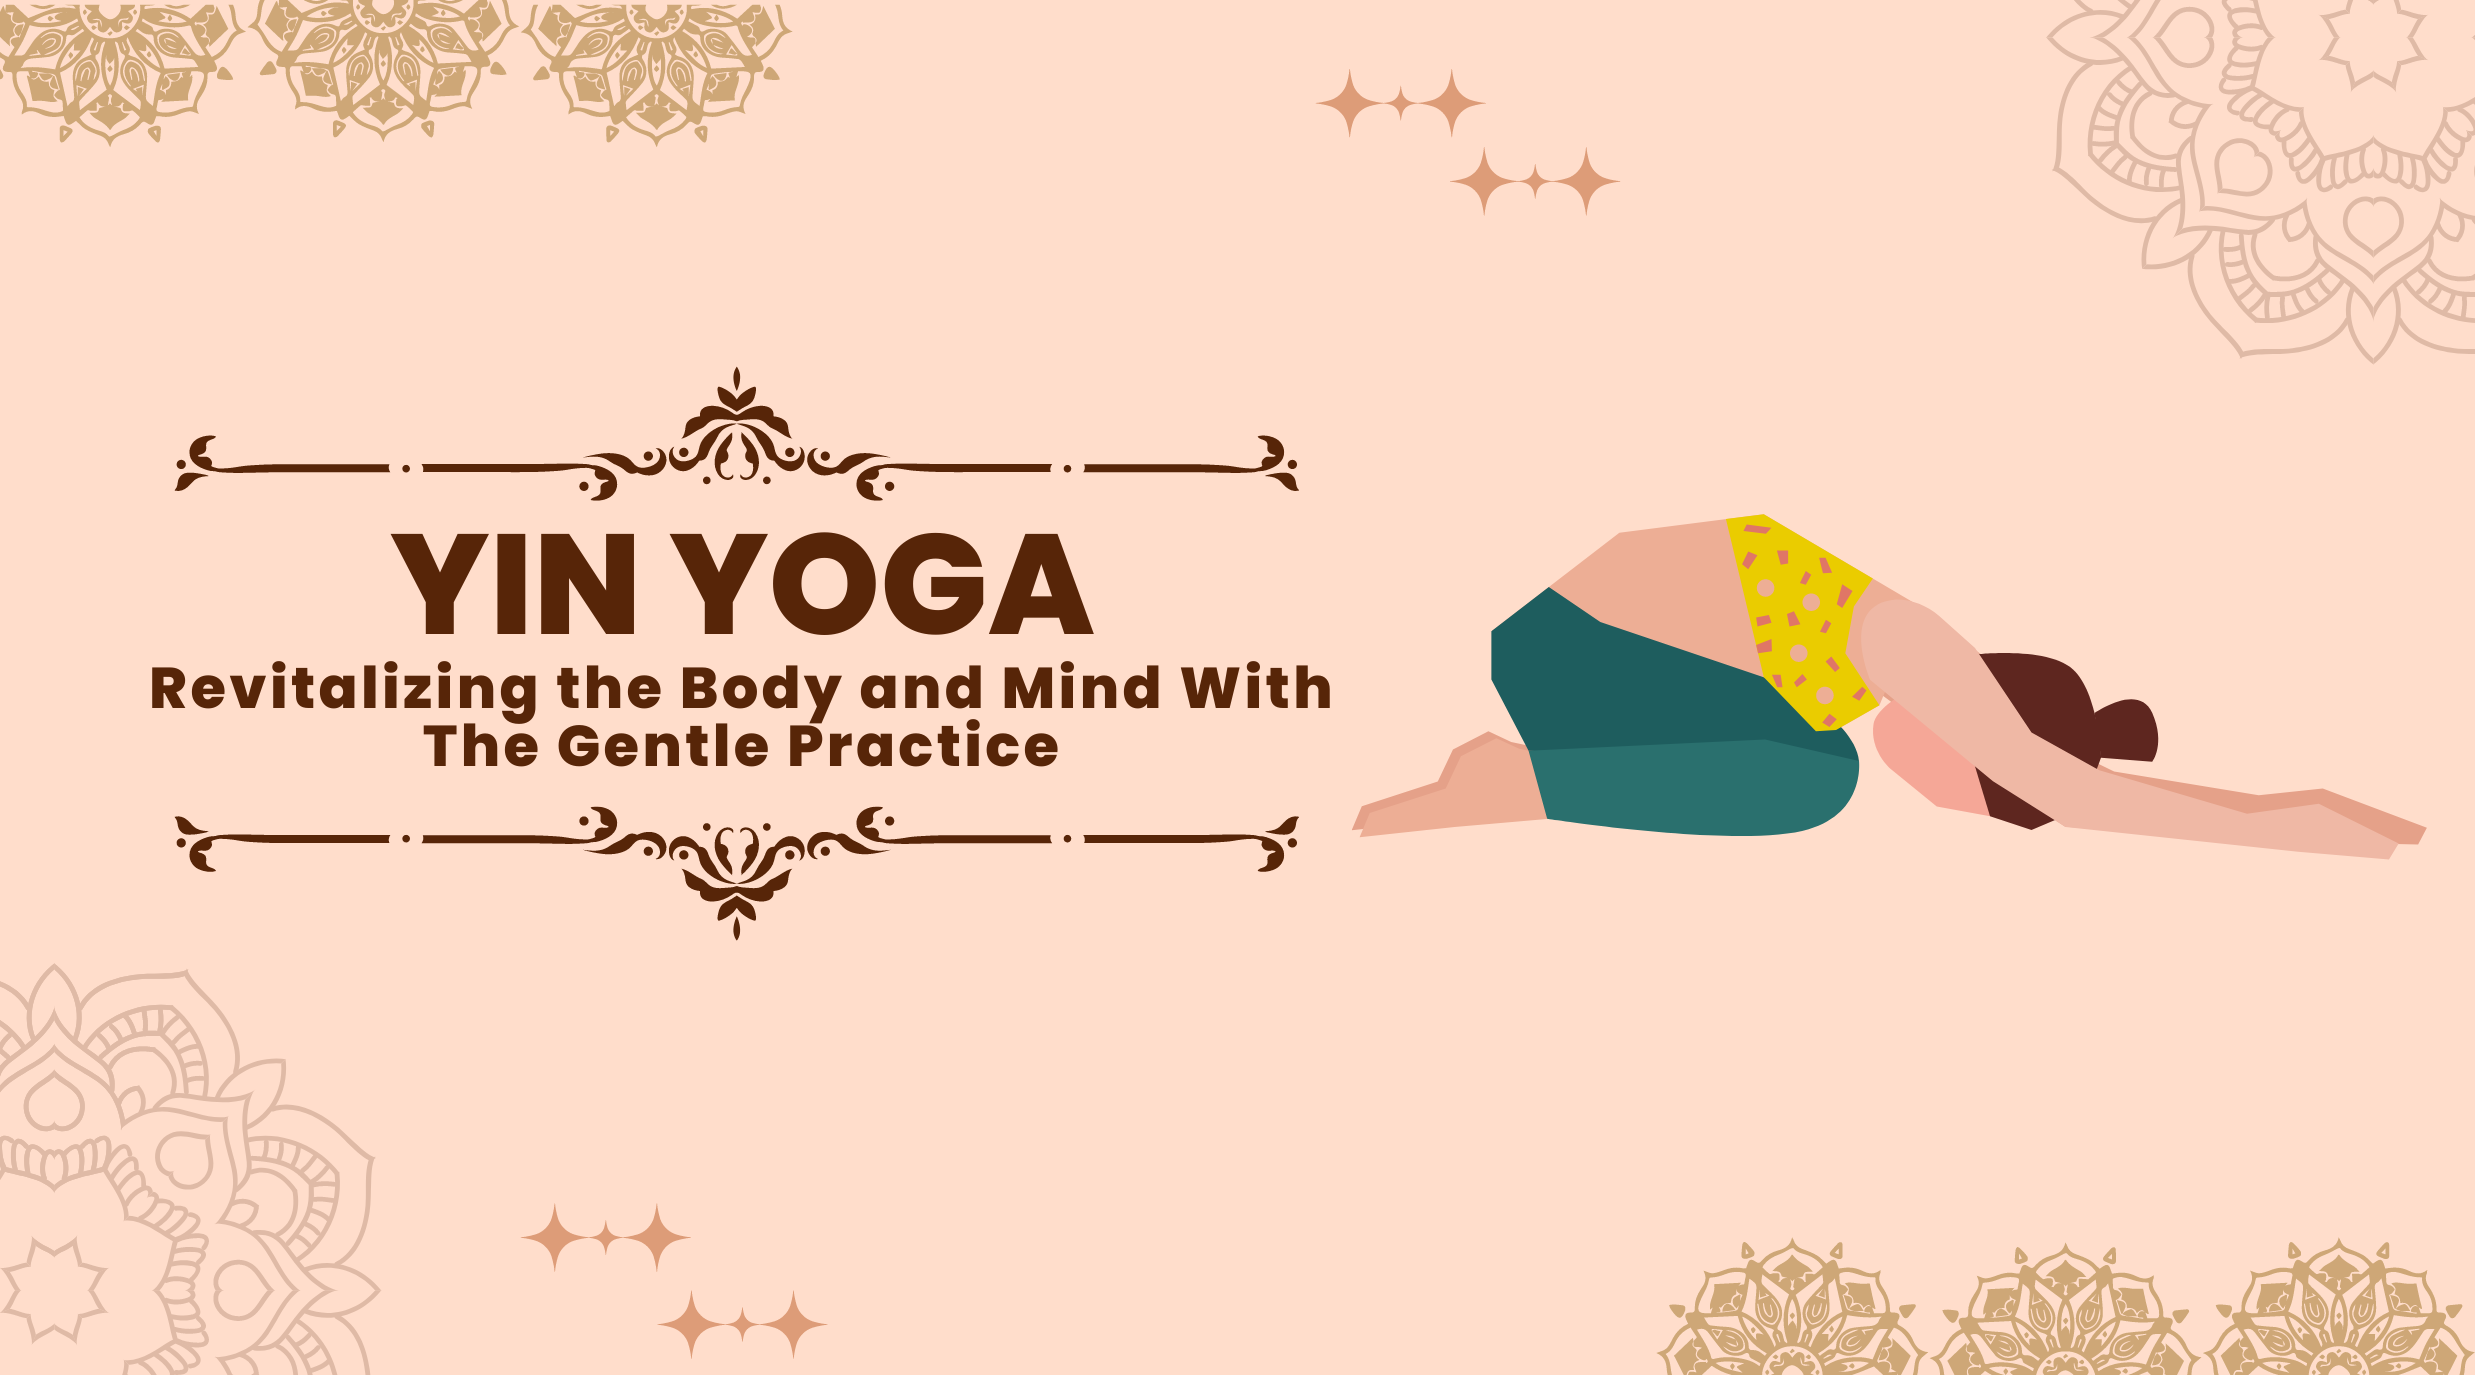 Yin Yoga: Revitalizing the Body and Mind With The Gentle Practice